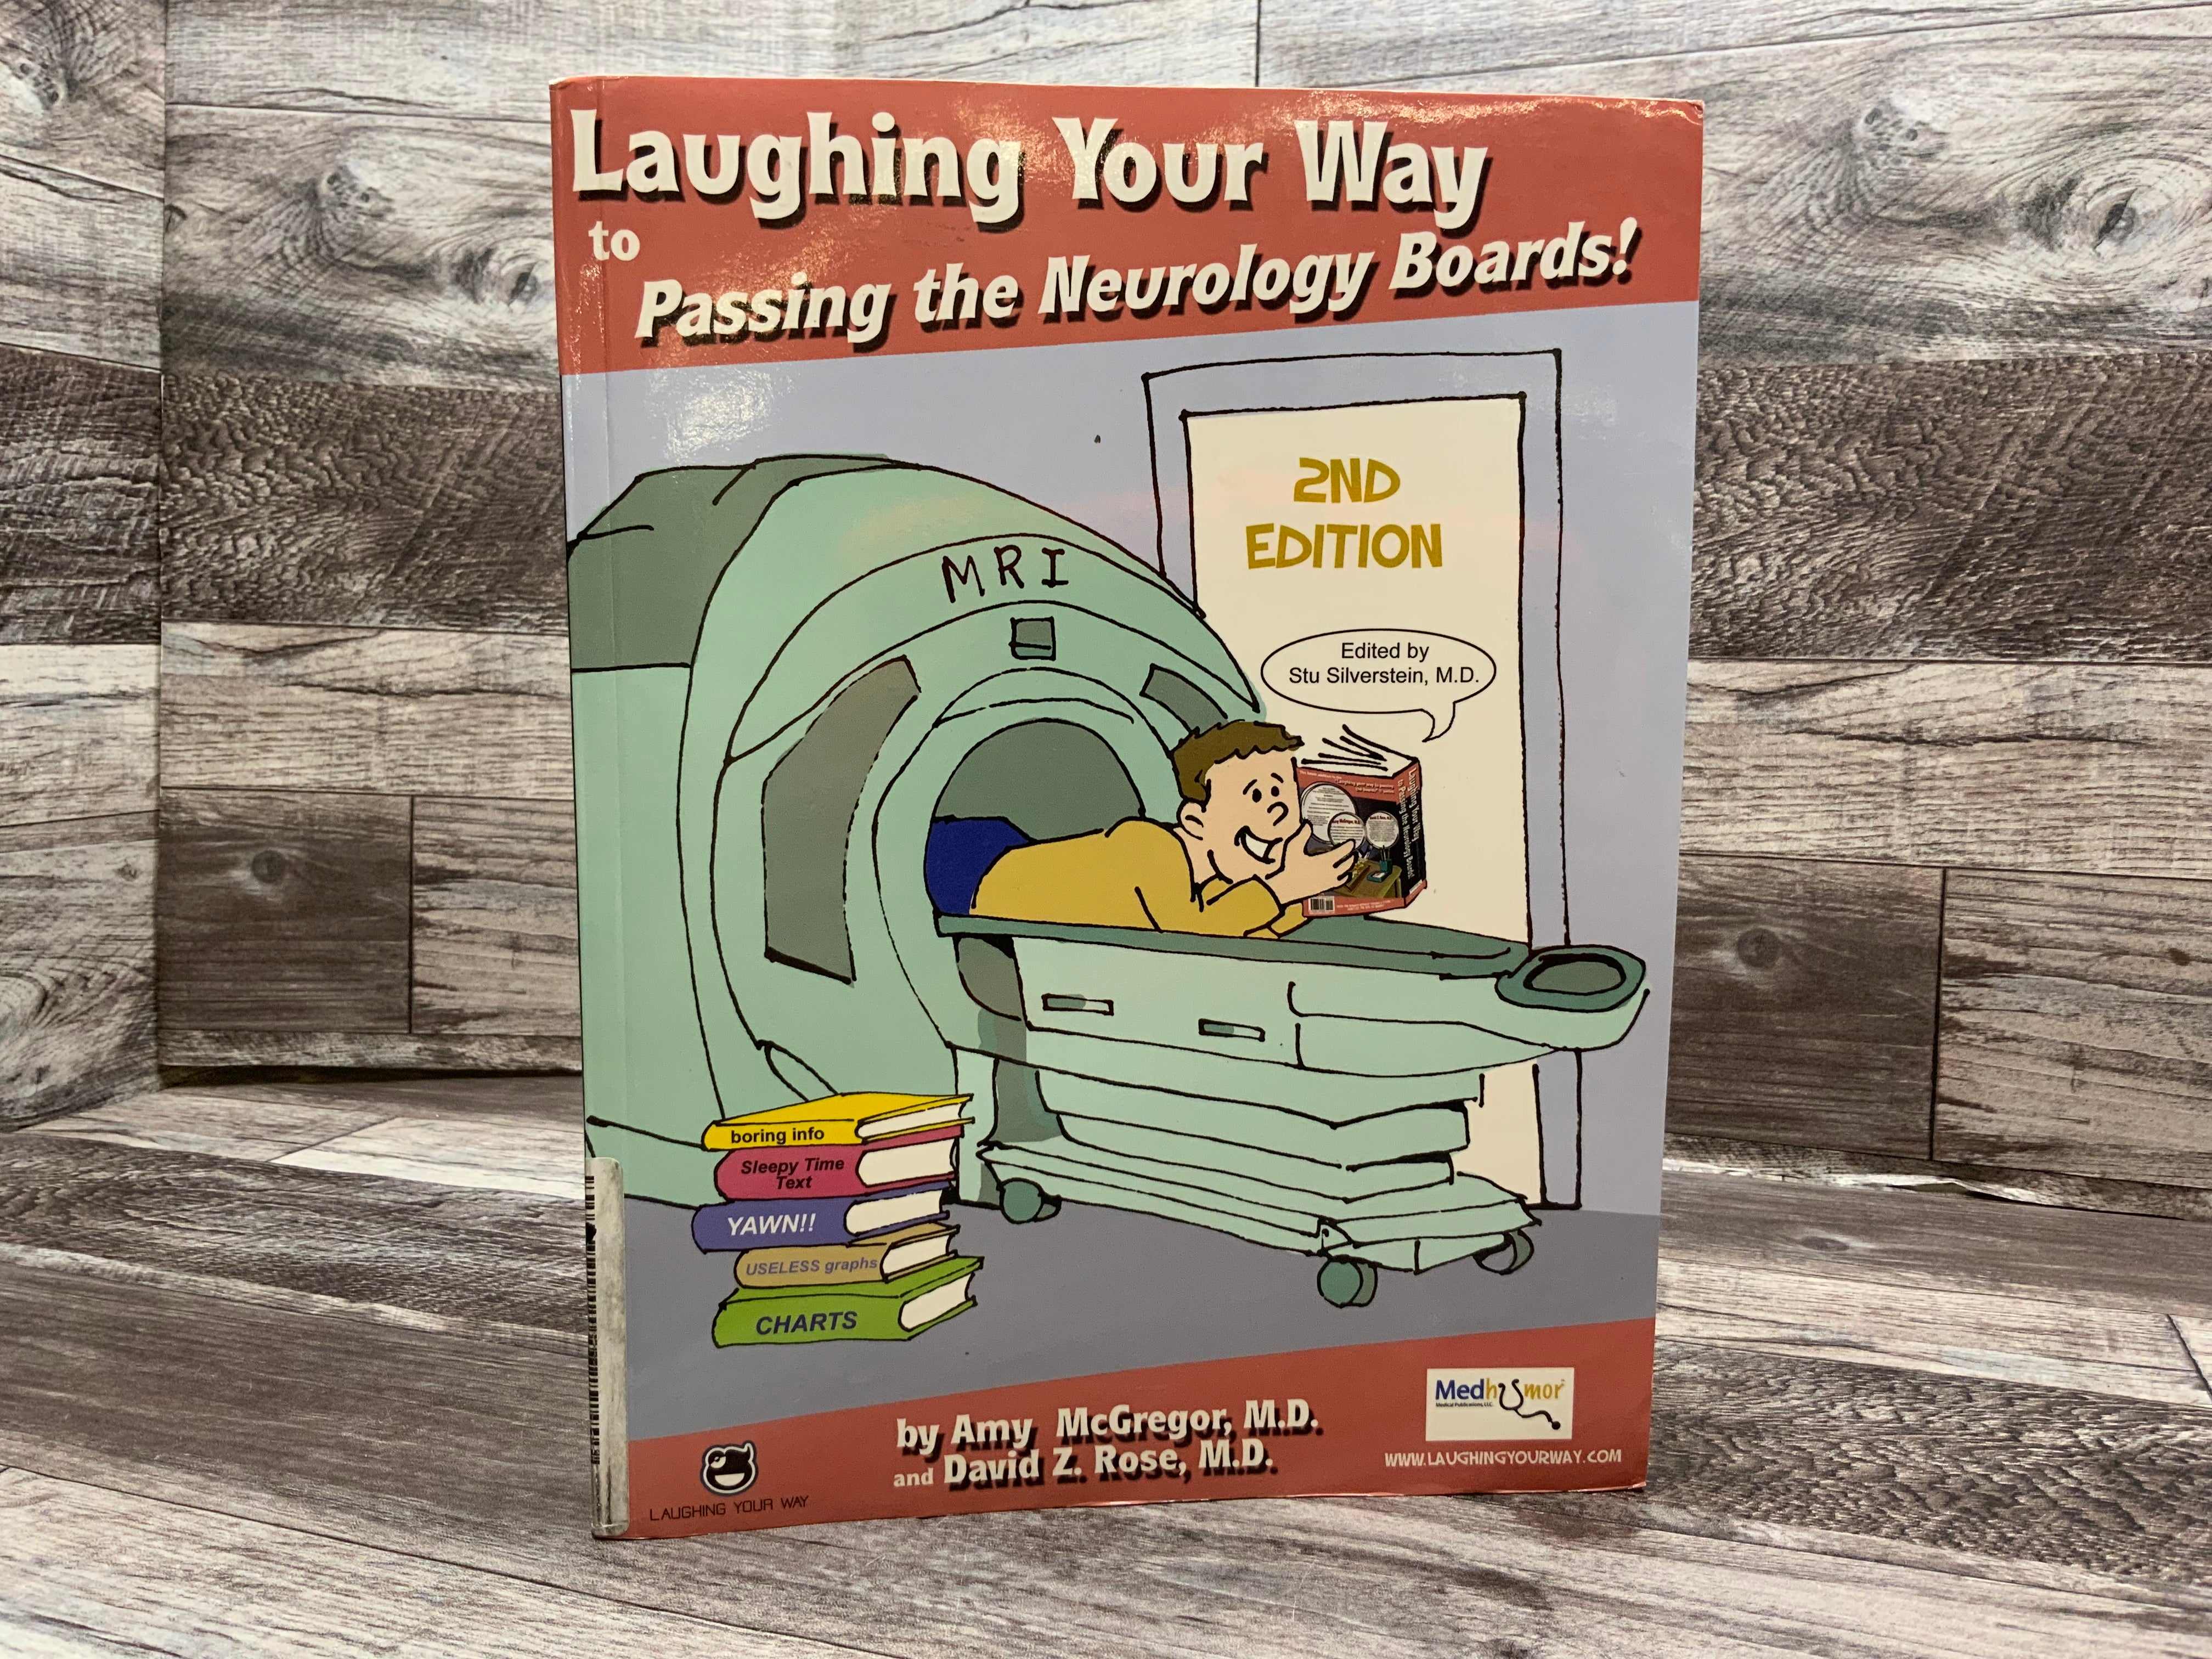 Laughing Your Way to Passing the Neurology Boards (2nd Edition) (8078801797358)